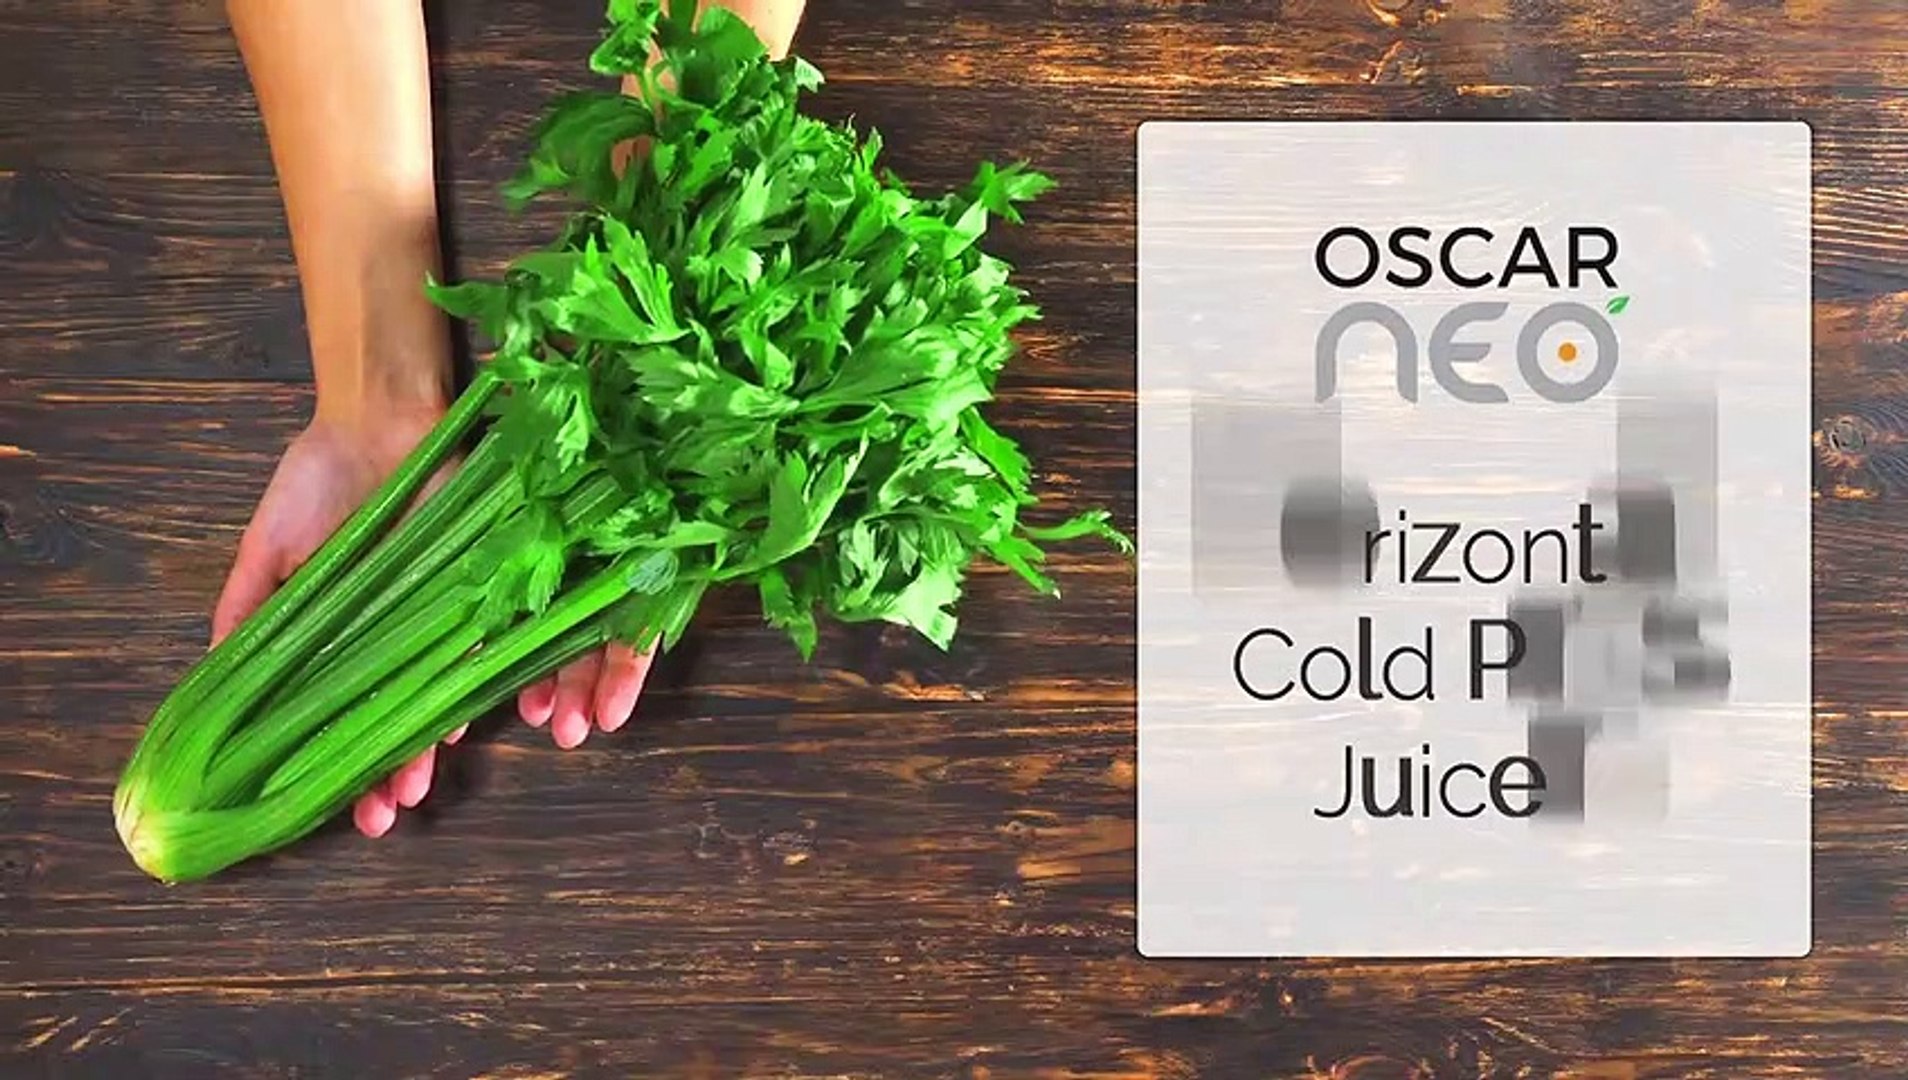 Oscar Neo Cold Press Juicers - Vitality 4 Life - video dailymotion